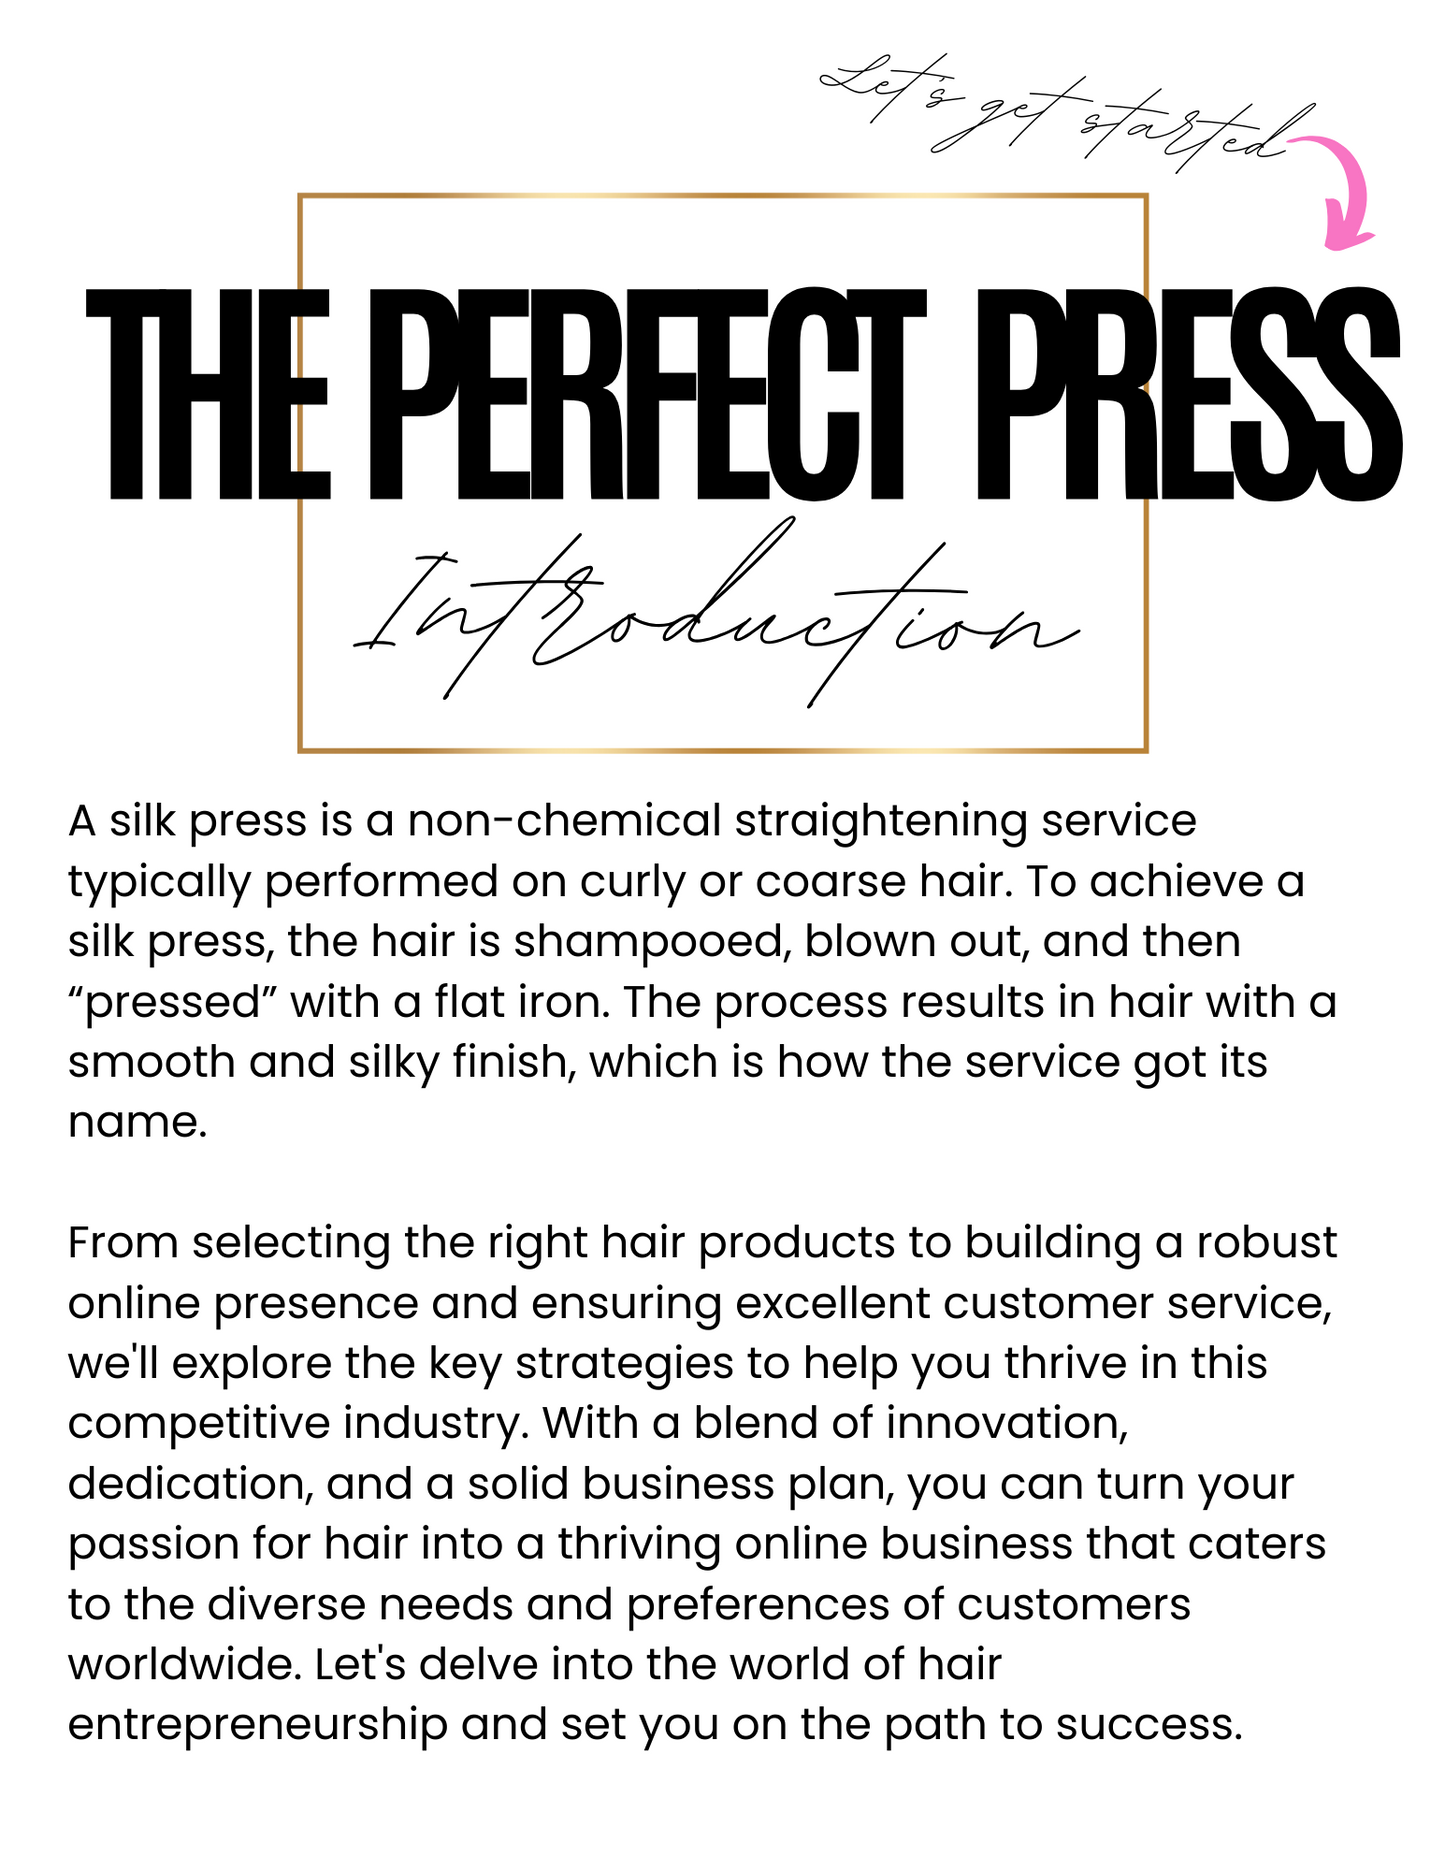 How to get the perfect Silk Press Ebook